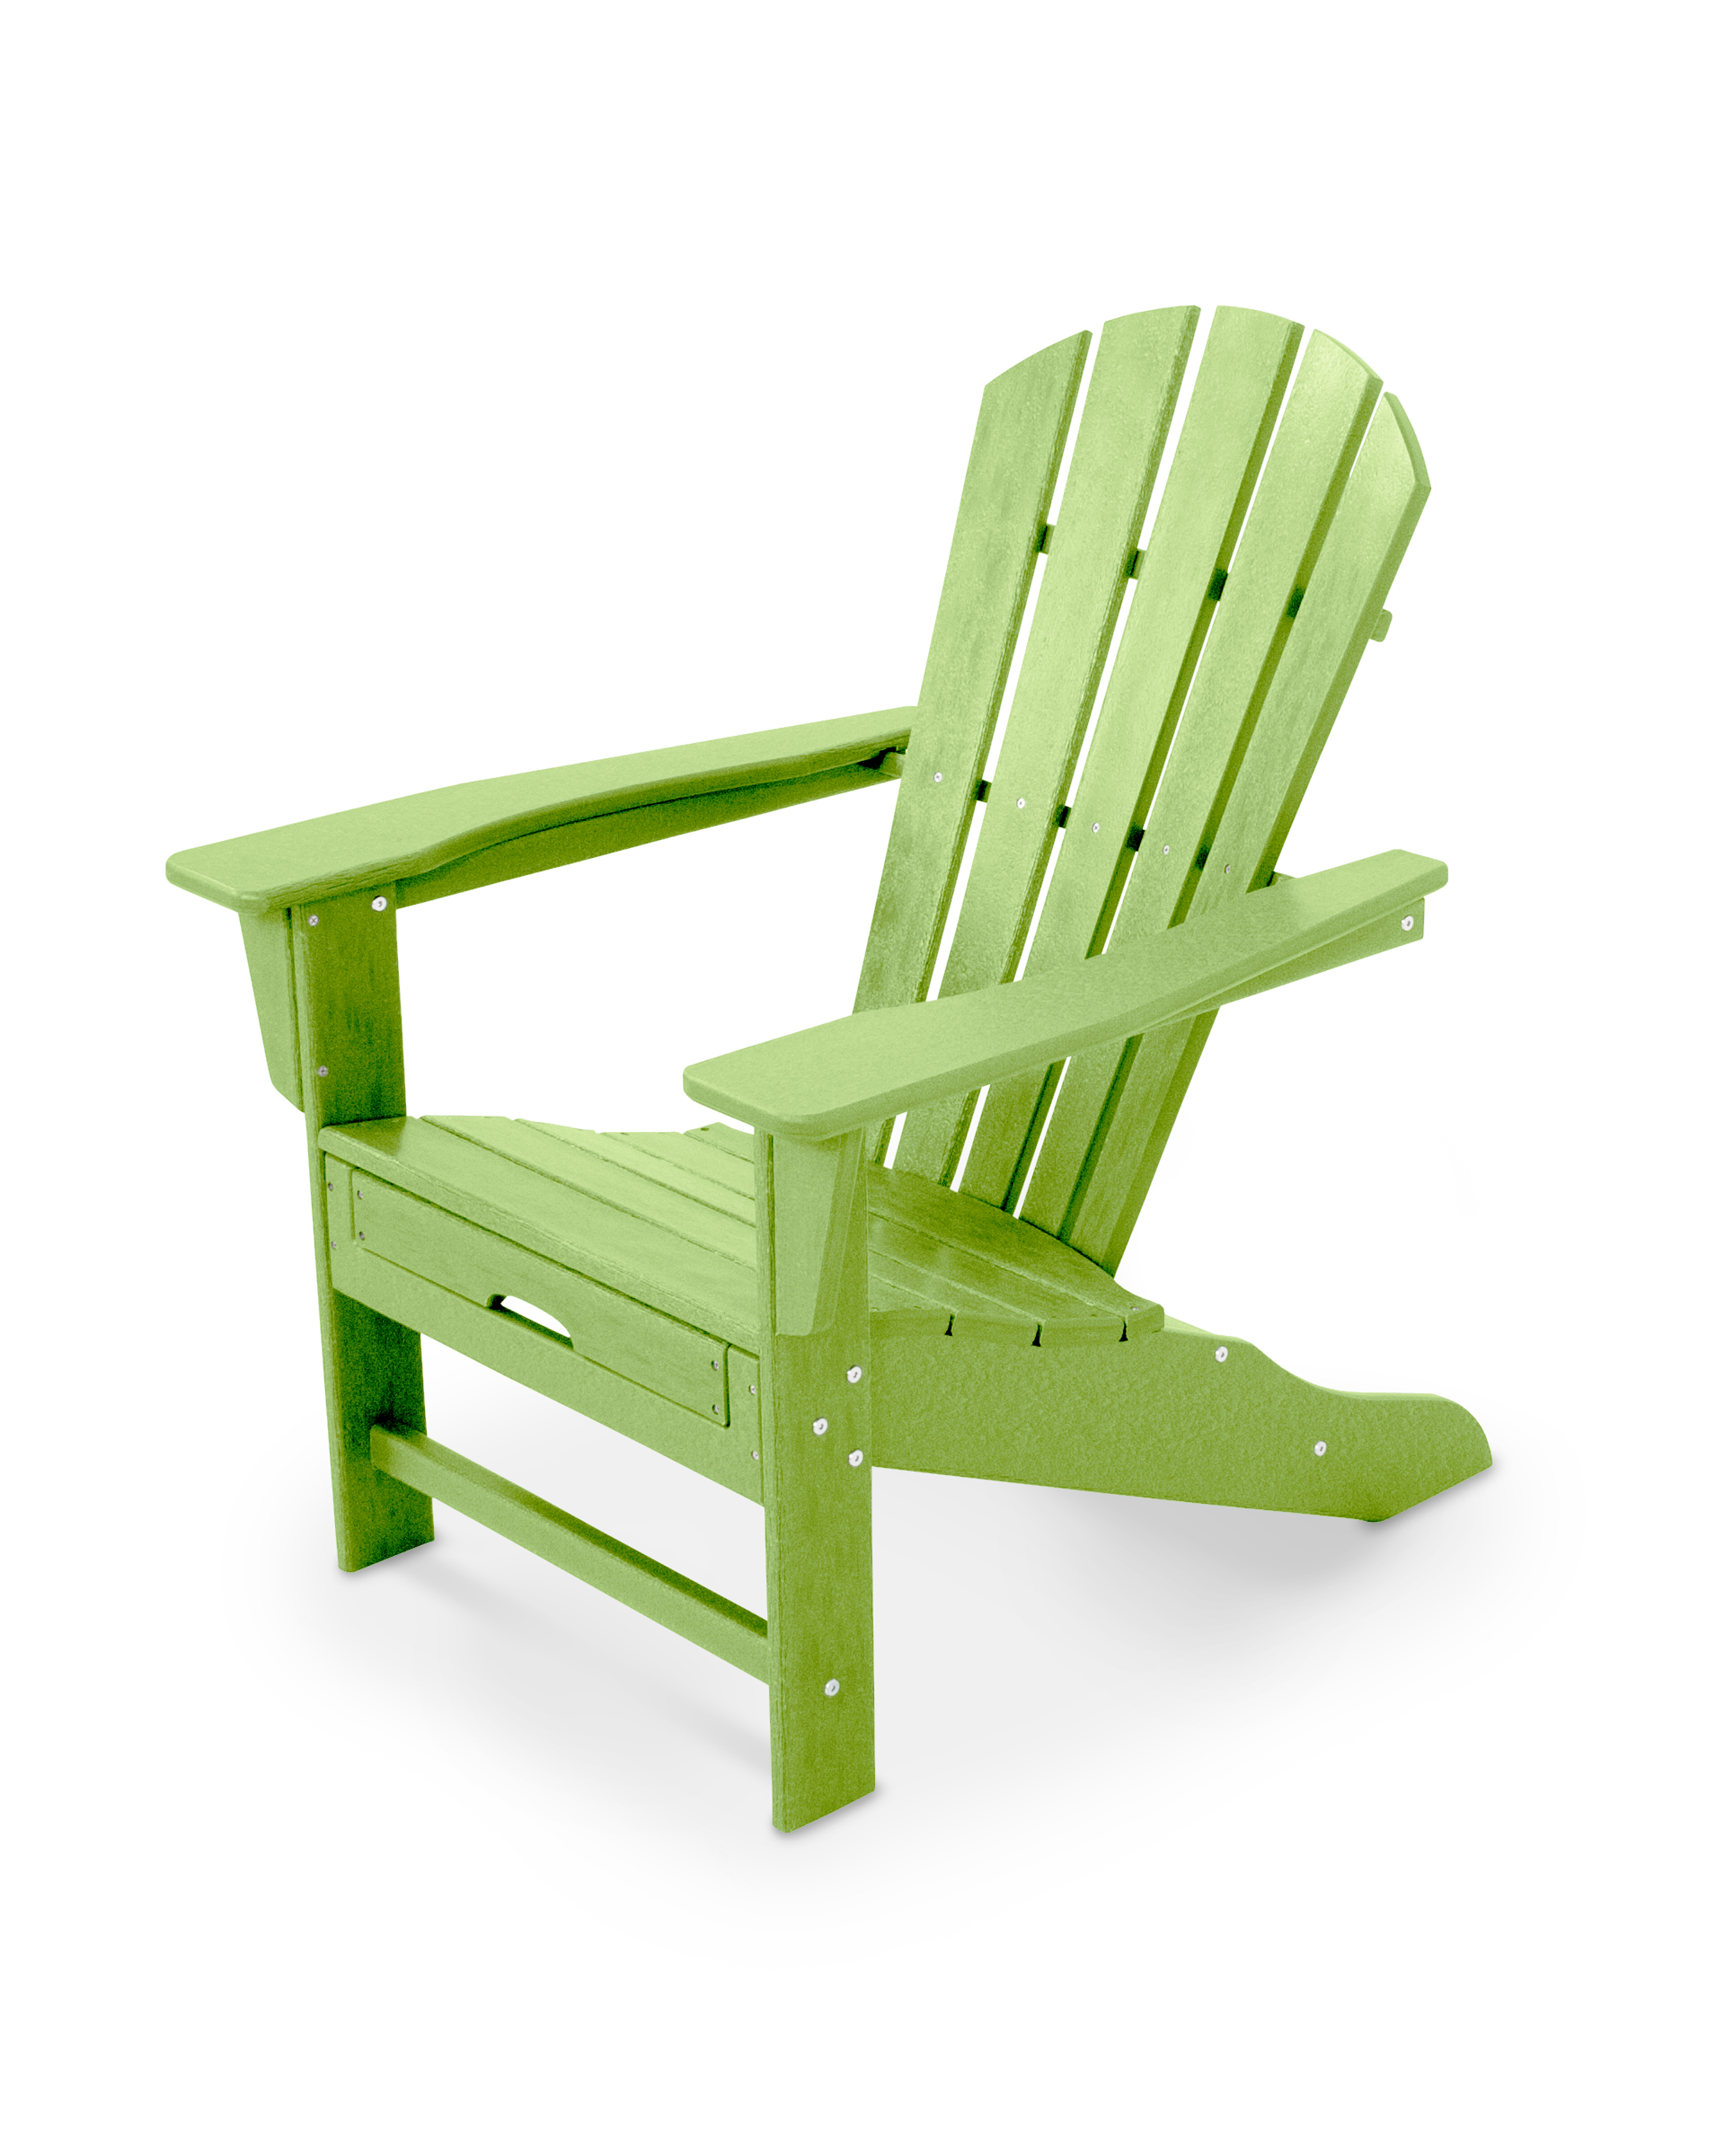 palm coast ultimate adirondack with hideaway ottoman in lime thumbnail image